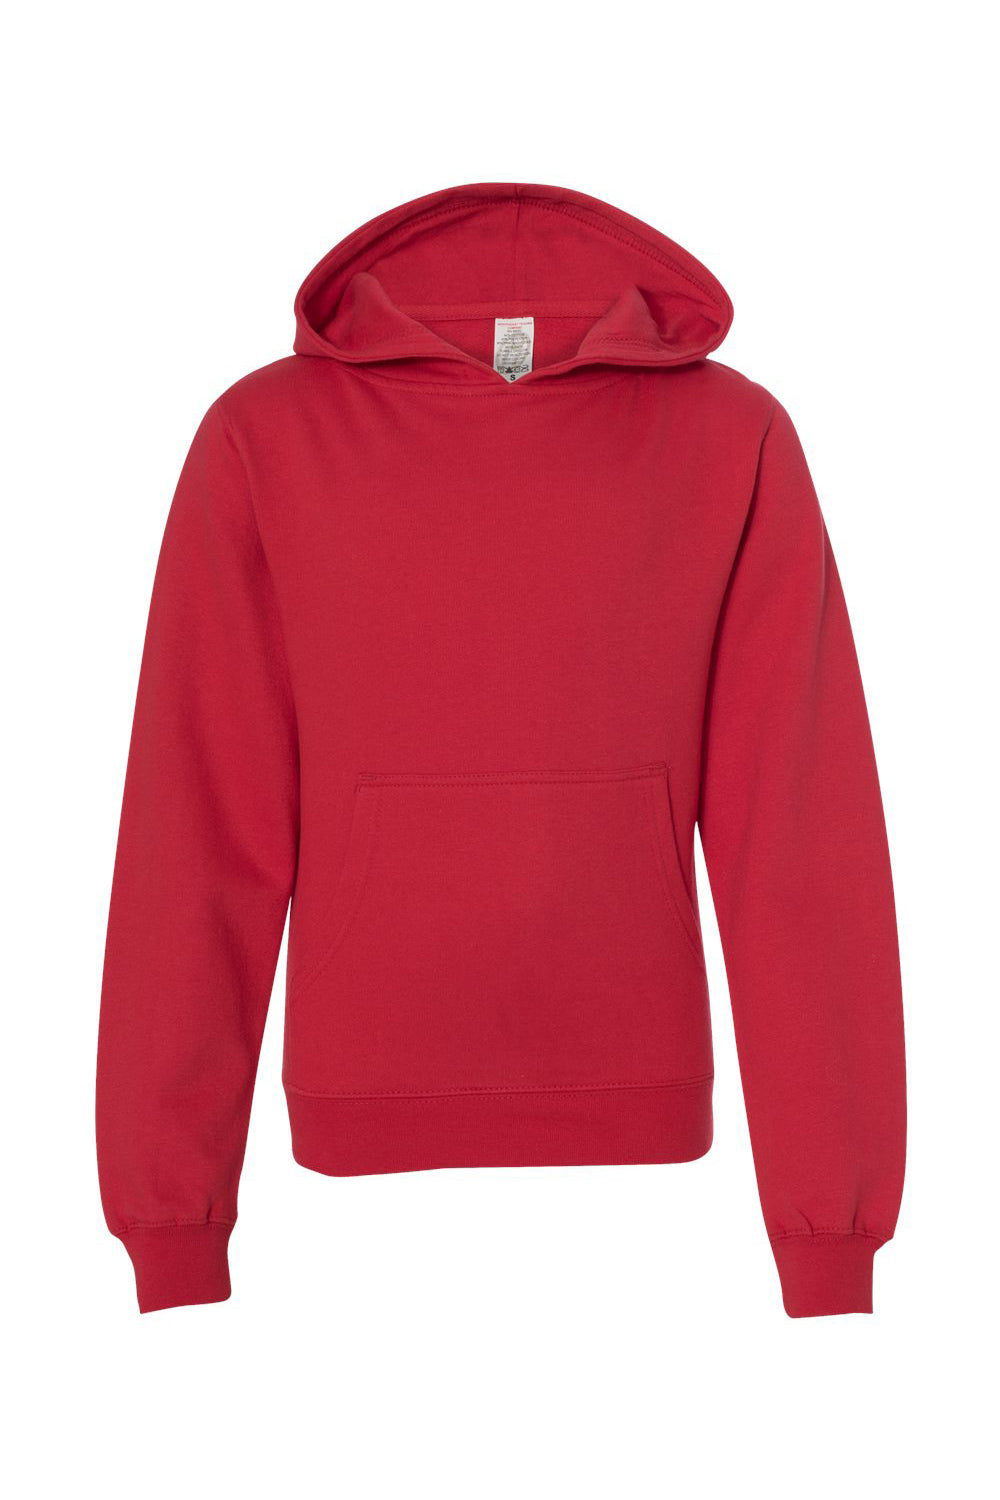 Independent Trading Co. SS4001Y Youth Hooded Sweatshirt Hoodie Red Flat Front